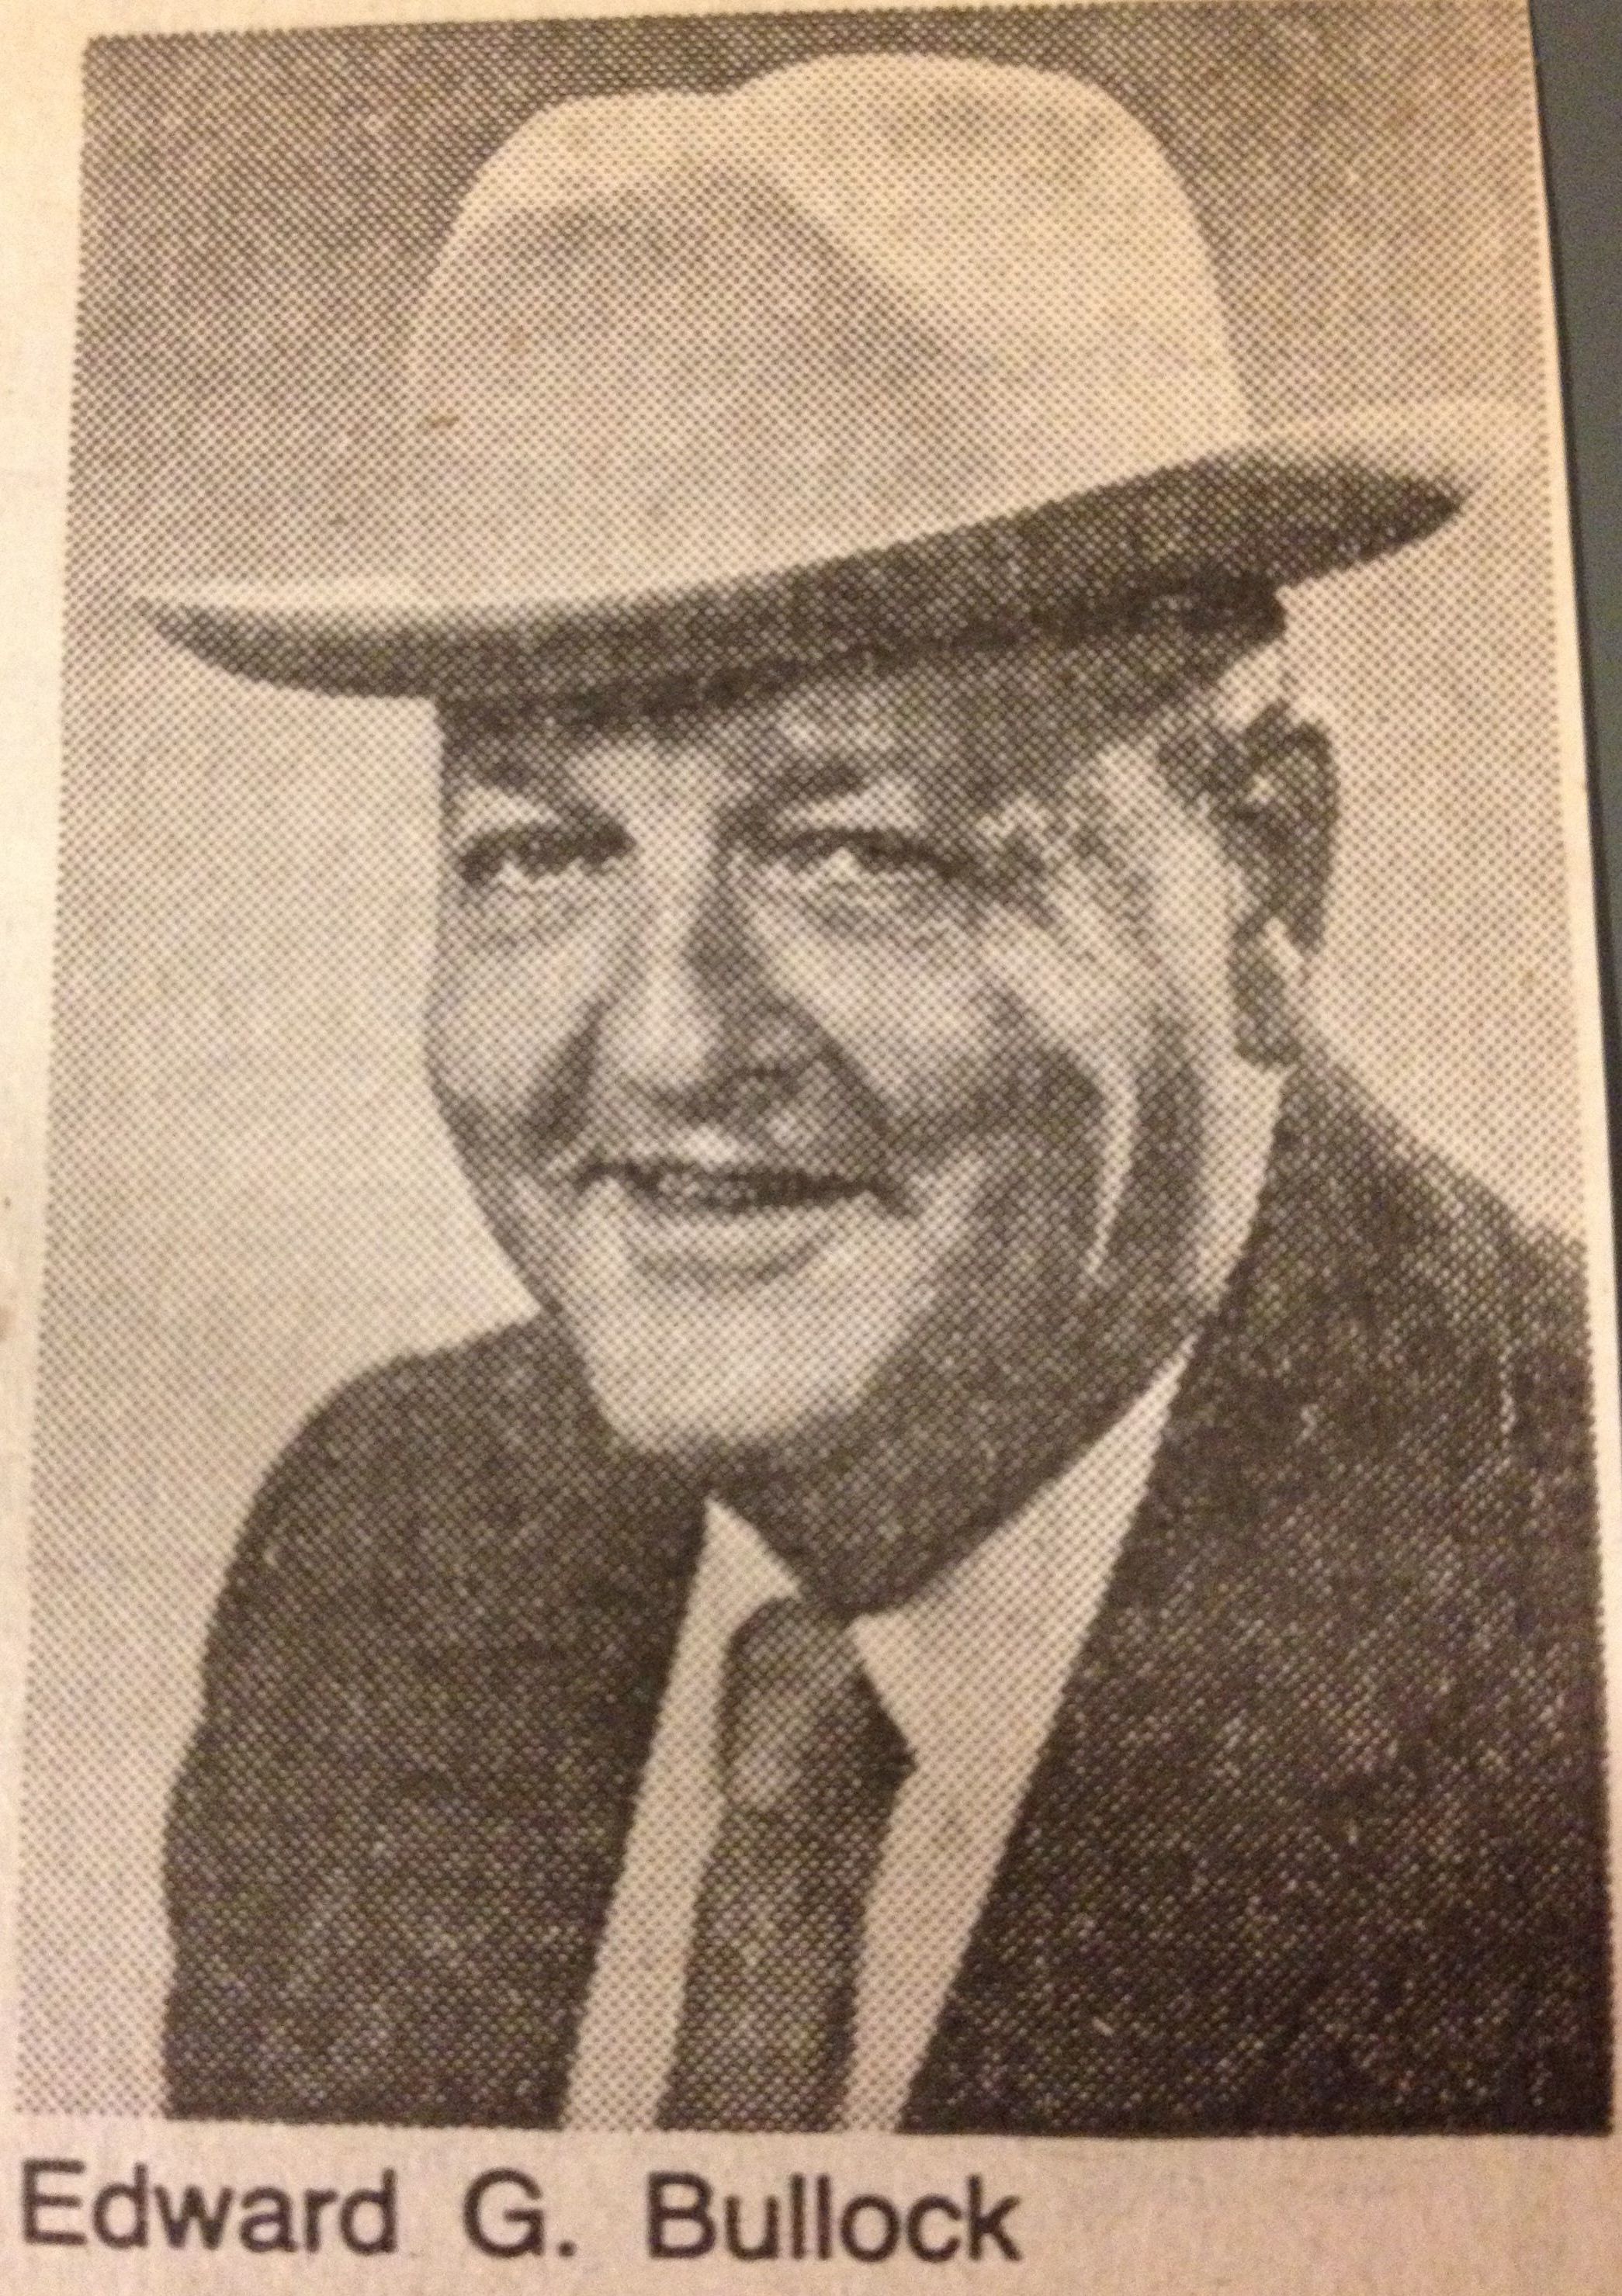 In 1988, Edward Bullock won his third term as Warren County's sheriff. He called himself a "natural" for the job, according to an Express-Times story before the election, which also says he was a 1946 graduate of Phillipsburg Catholic High School and served in the Army from 1951 to 1953.